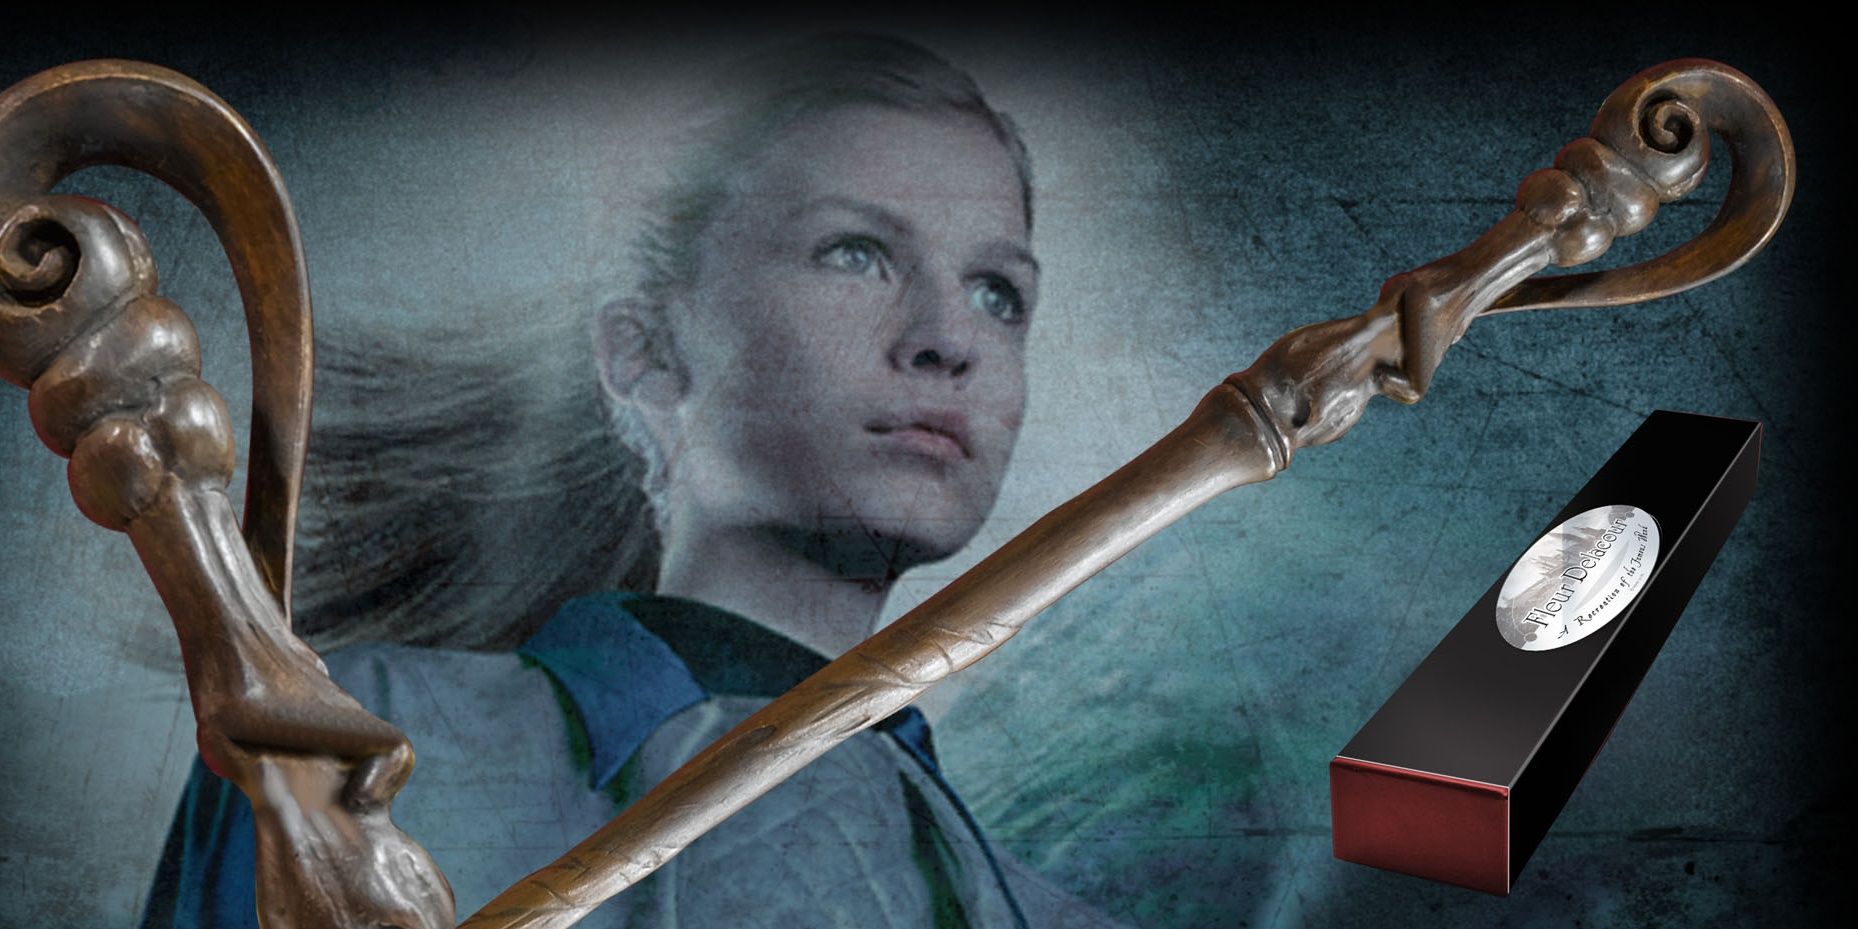 10 Facts About Wands In Harry Potter That The Movies Leave Out